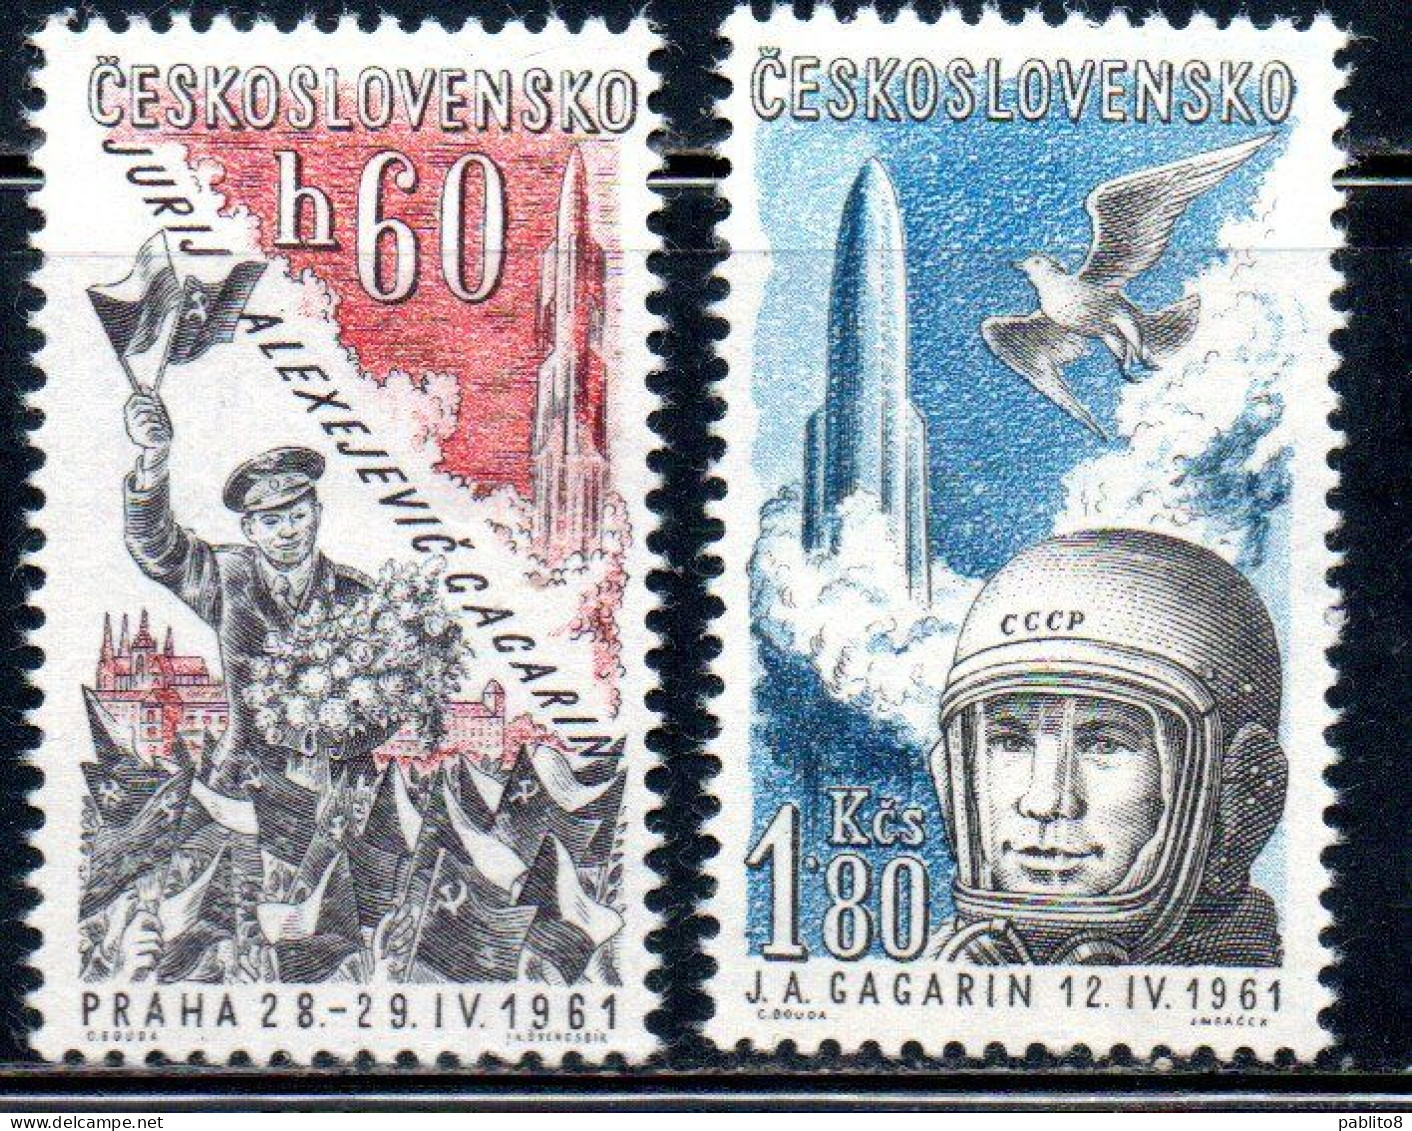 CZECHOSLOVAKIA CECOSLOVACCHIA 1961 AIR POST MAIL AIRMAIL COMMEMORATES MAY GAGARIN' VISIT COMPLETE SET SERIE COMPLETA MNH - Poste Aérienne